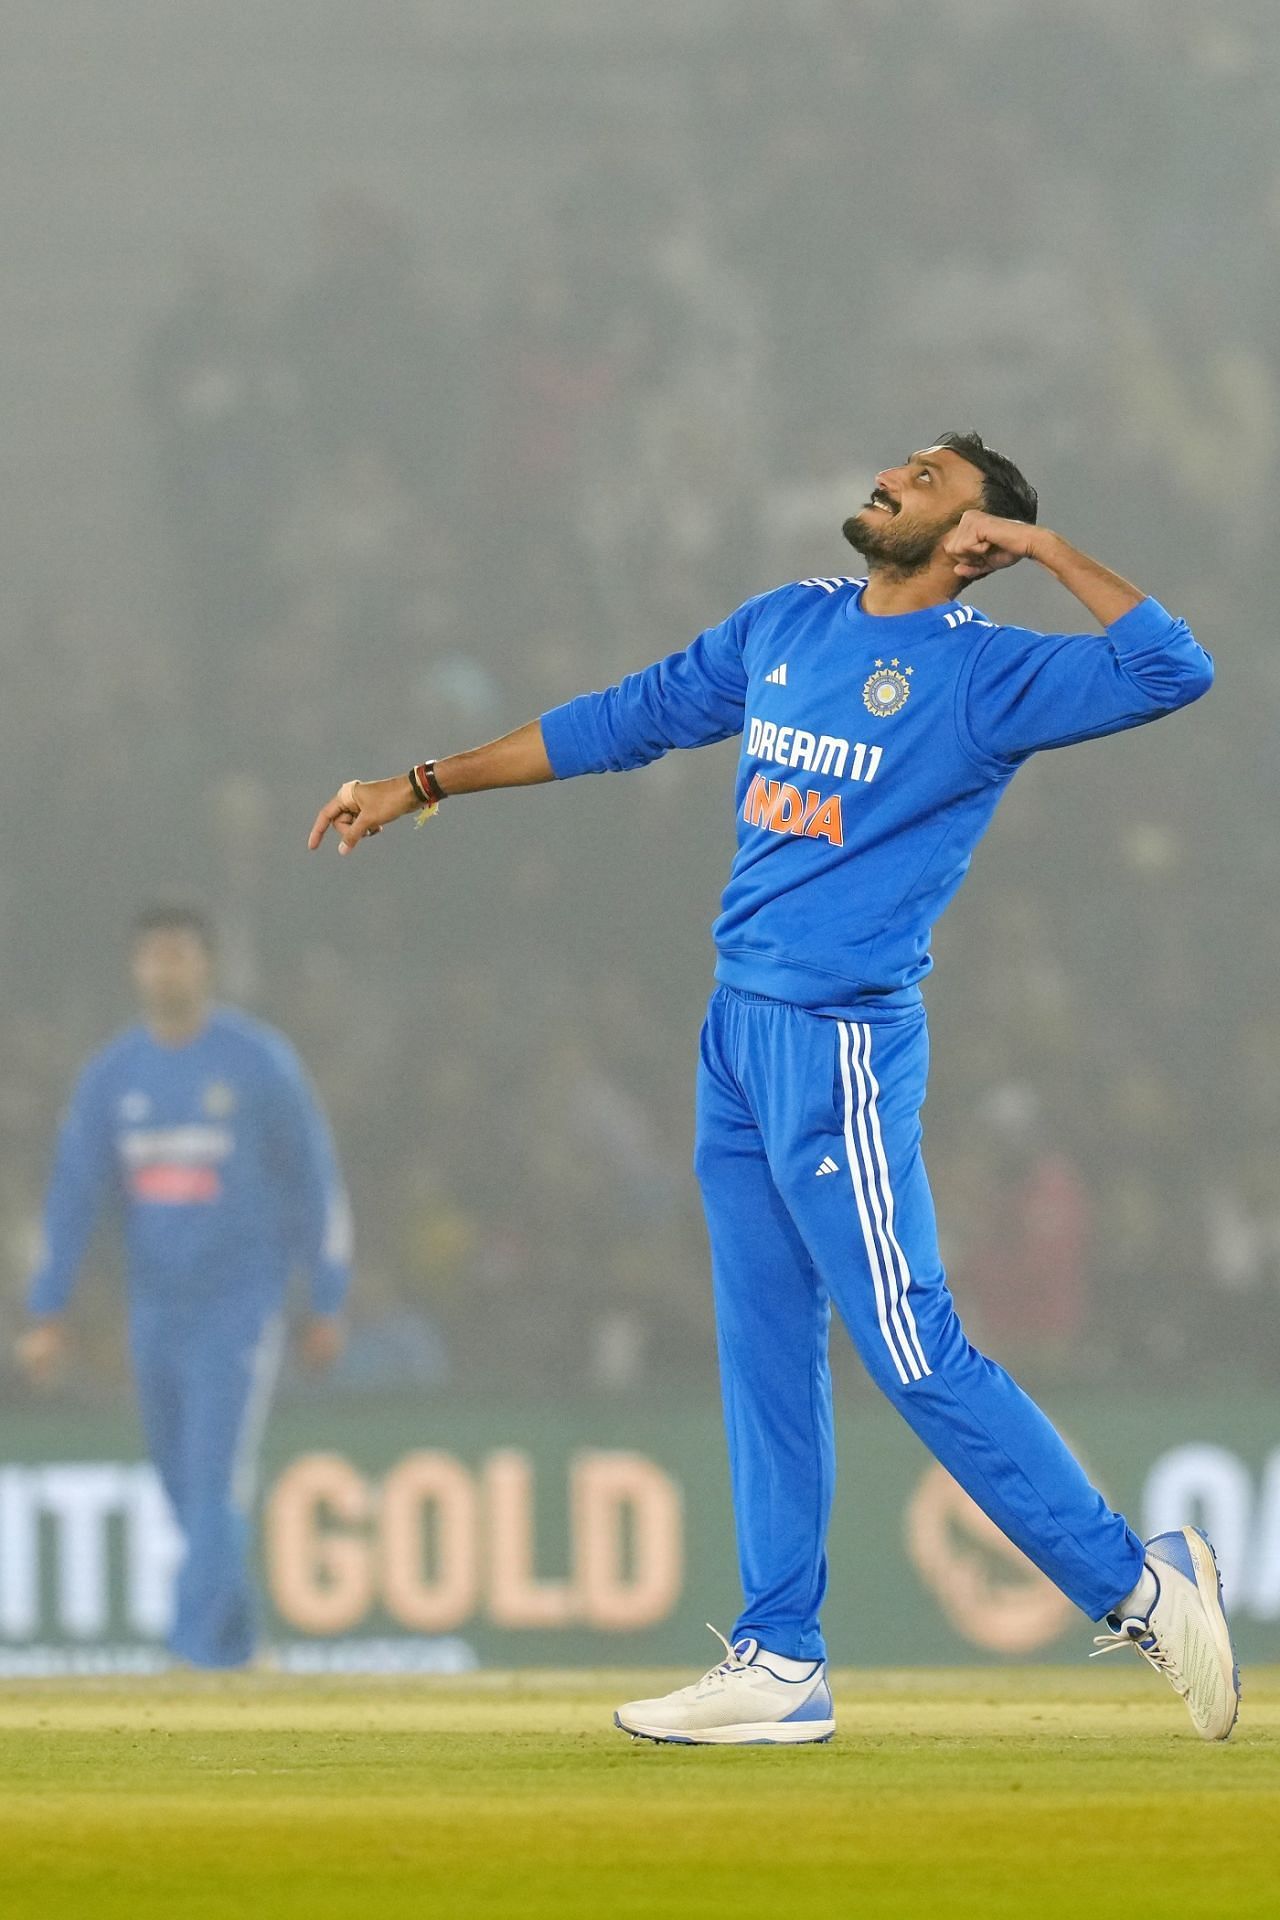 Axar Patel celebrates his second wicket during 2nd T20I (Credits: BCCI)